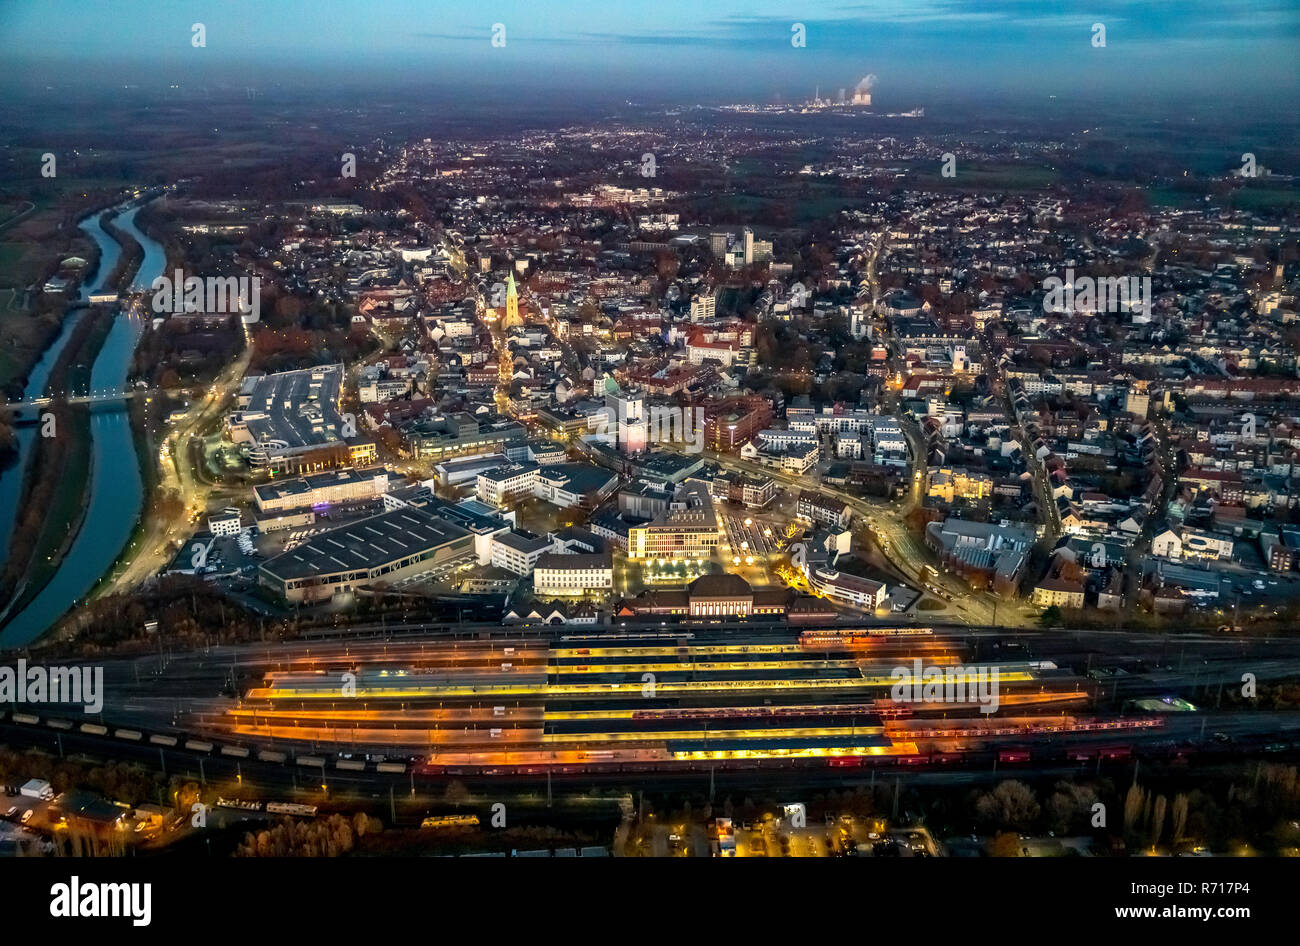 Aerial view, city centre, dusk with central station, Hamm, Ruhr area, North Rhine-Westphalia, German Stock Photo